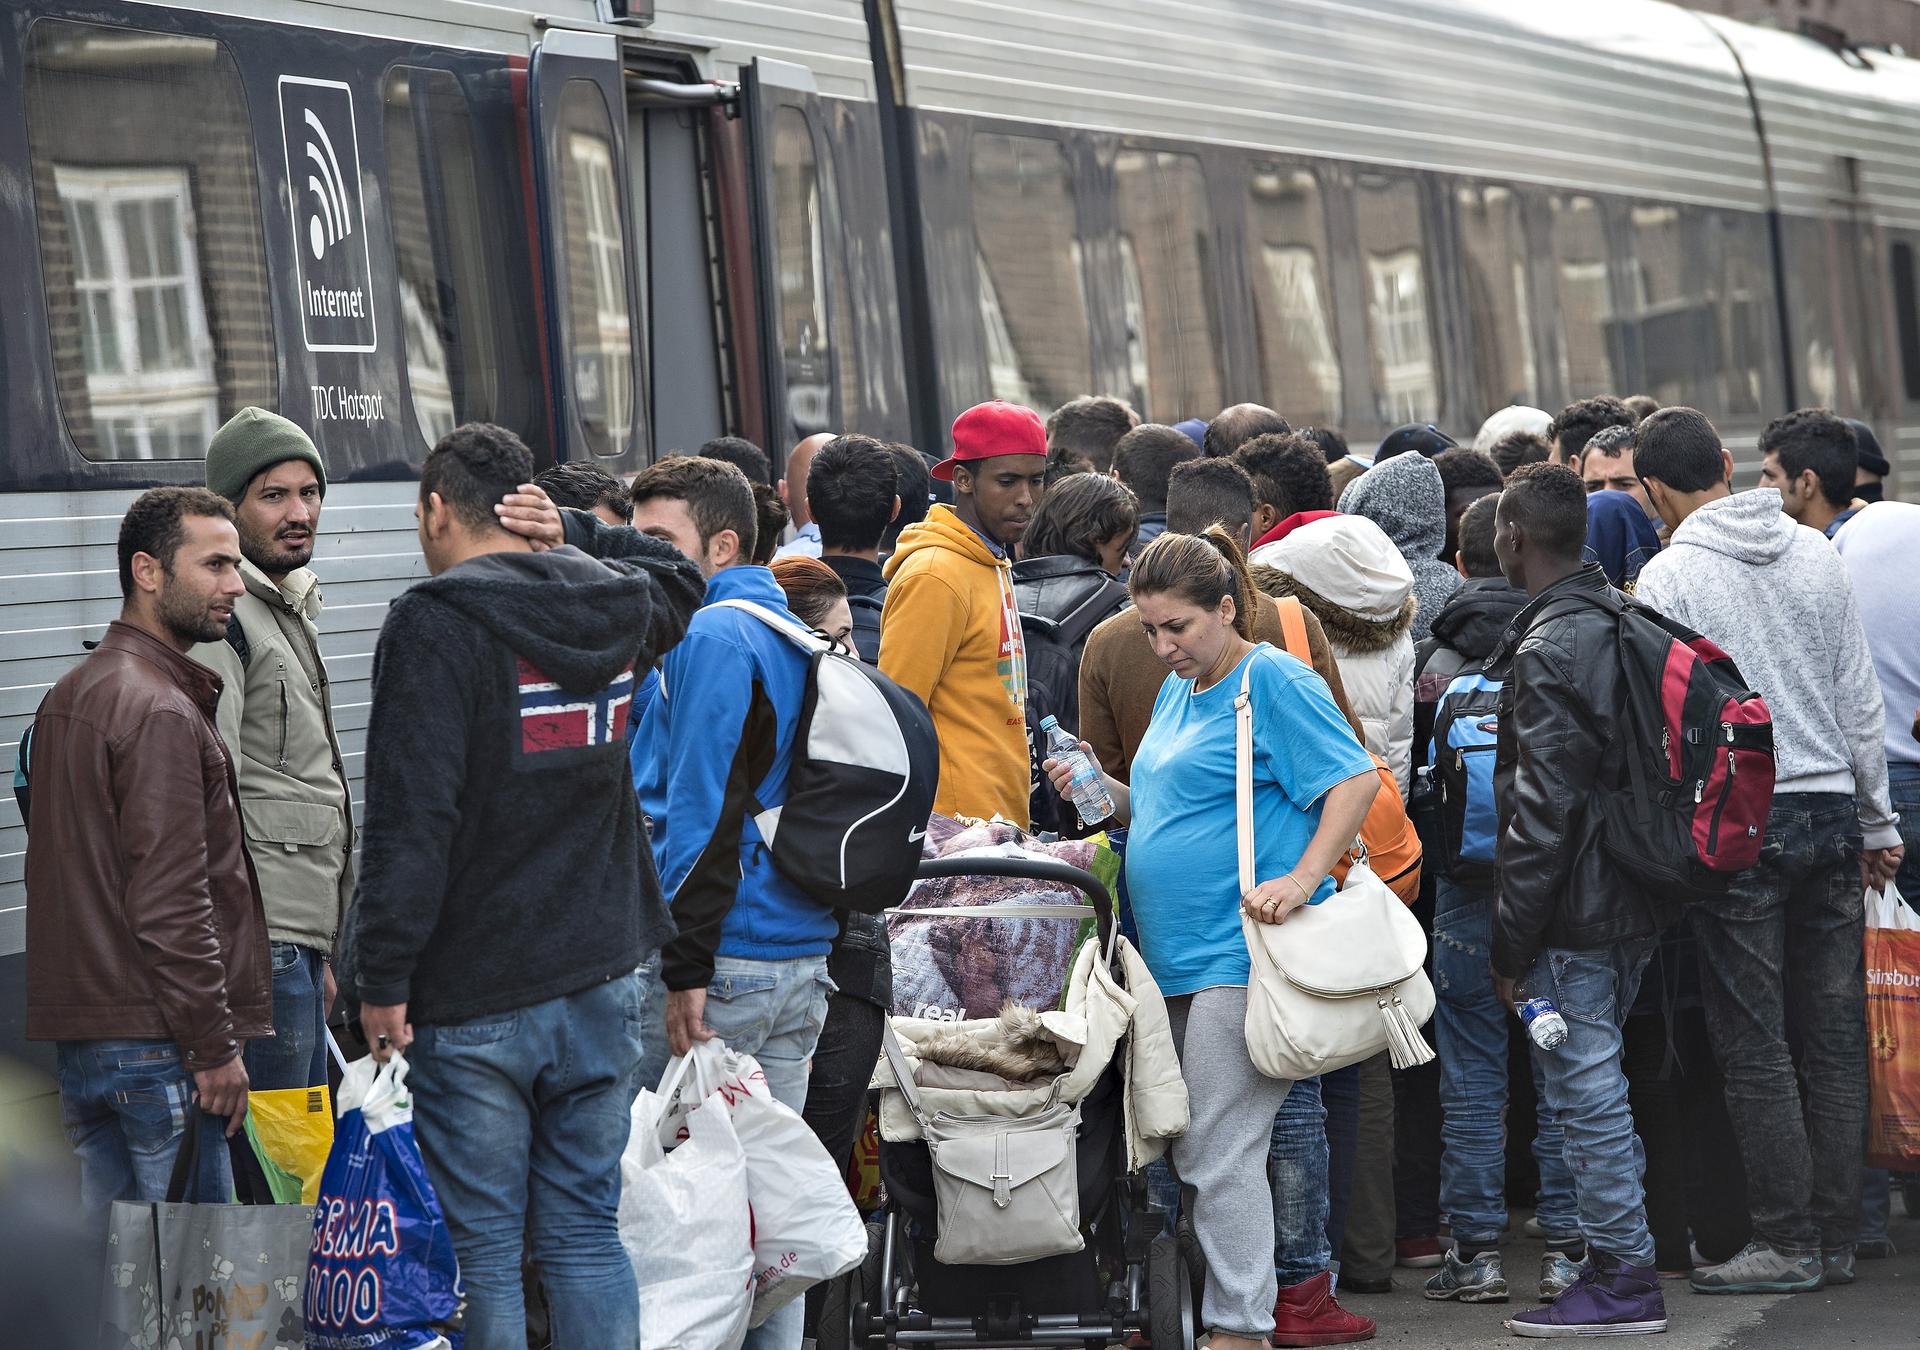 Migrants, mainly from Syria, prepare to board a train headed for Sweden, at Padborg station in southern Denmark, Sept. 10, 2015.